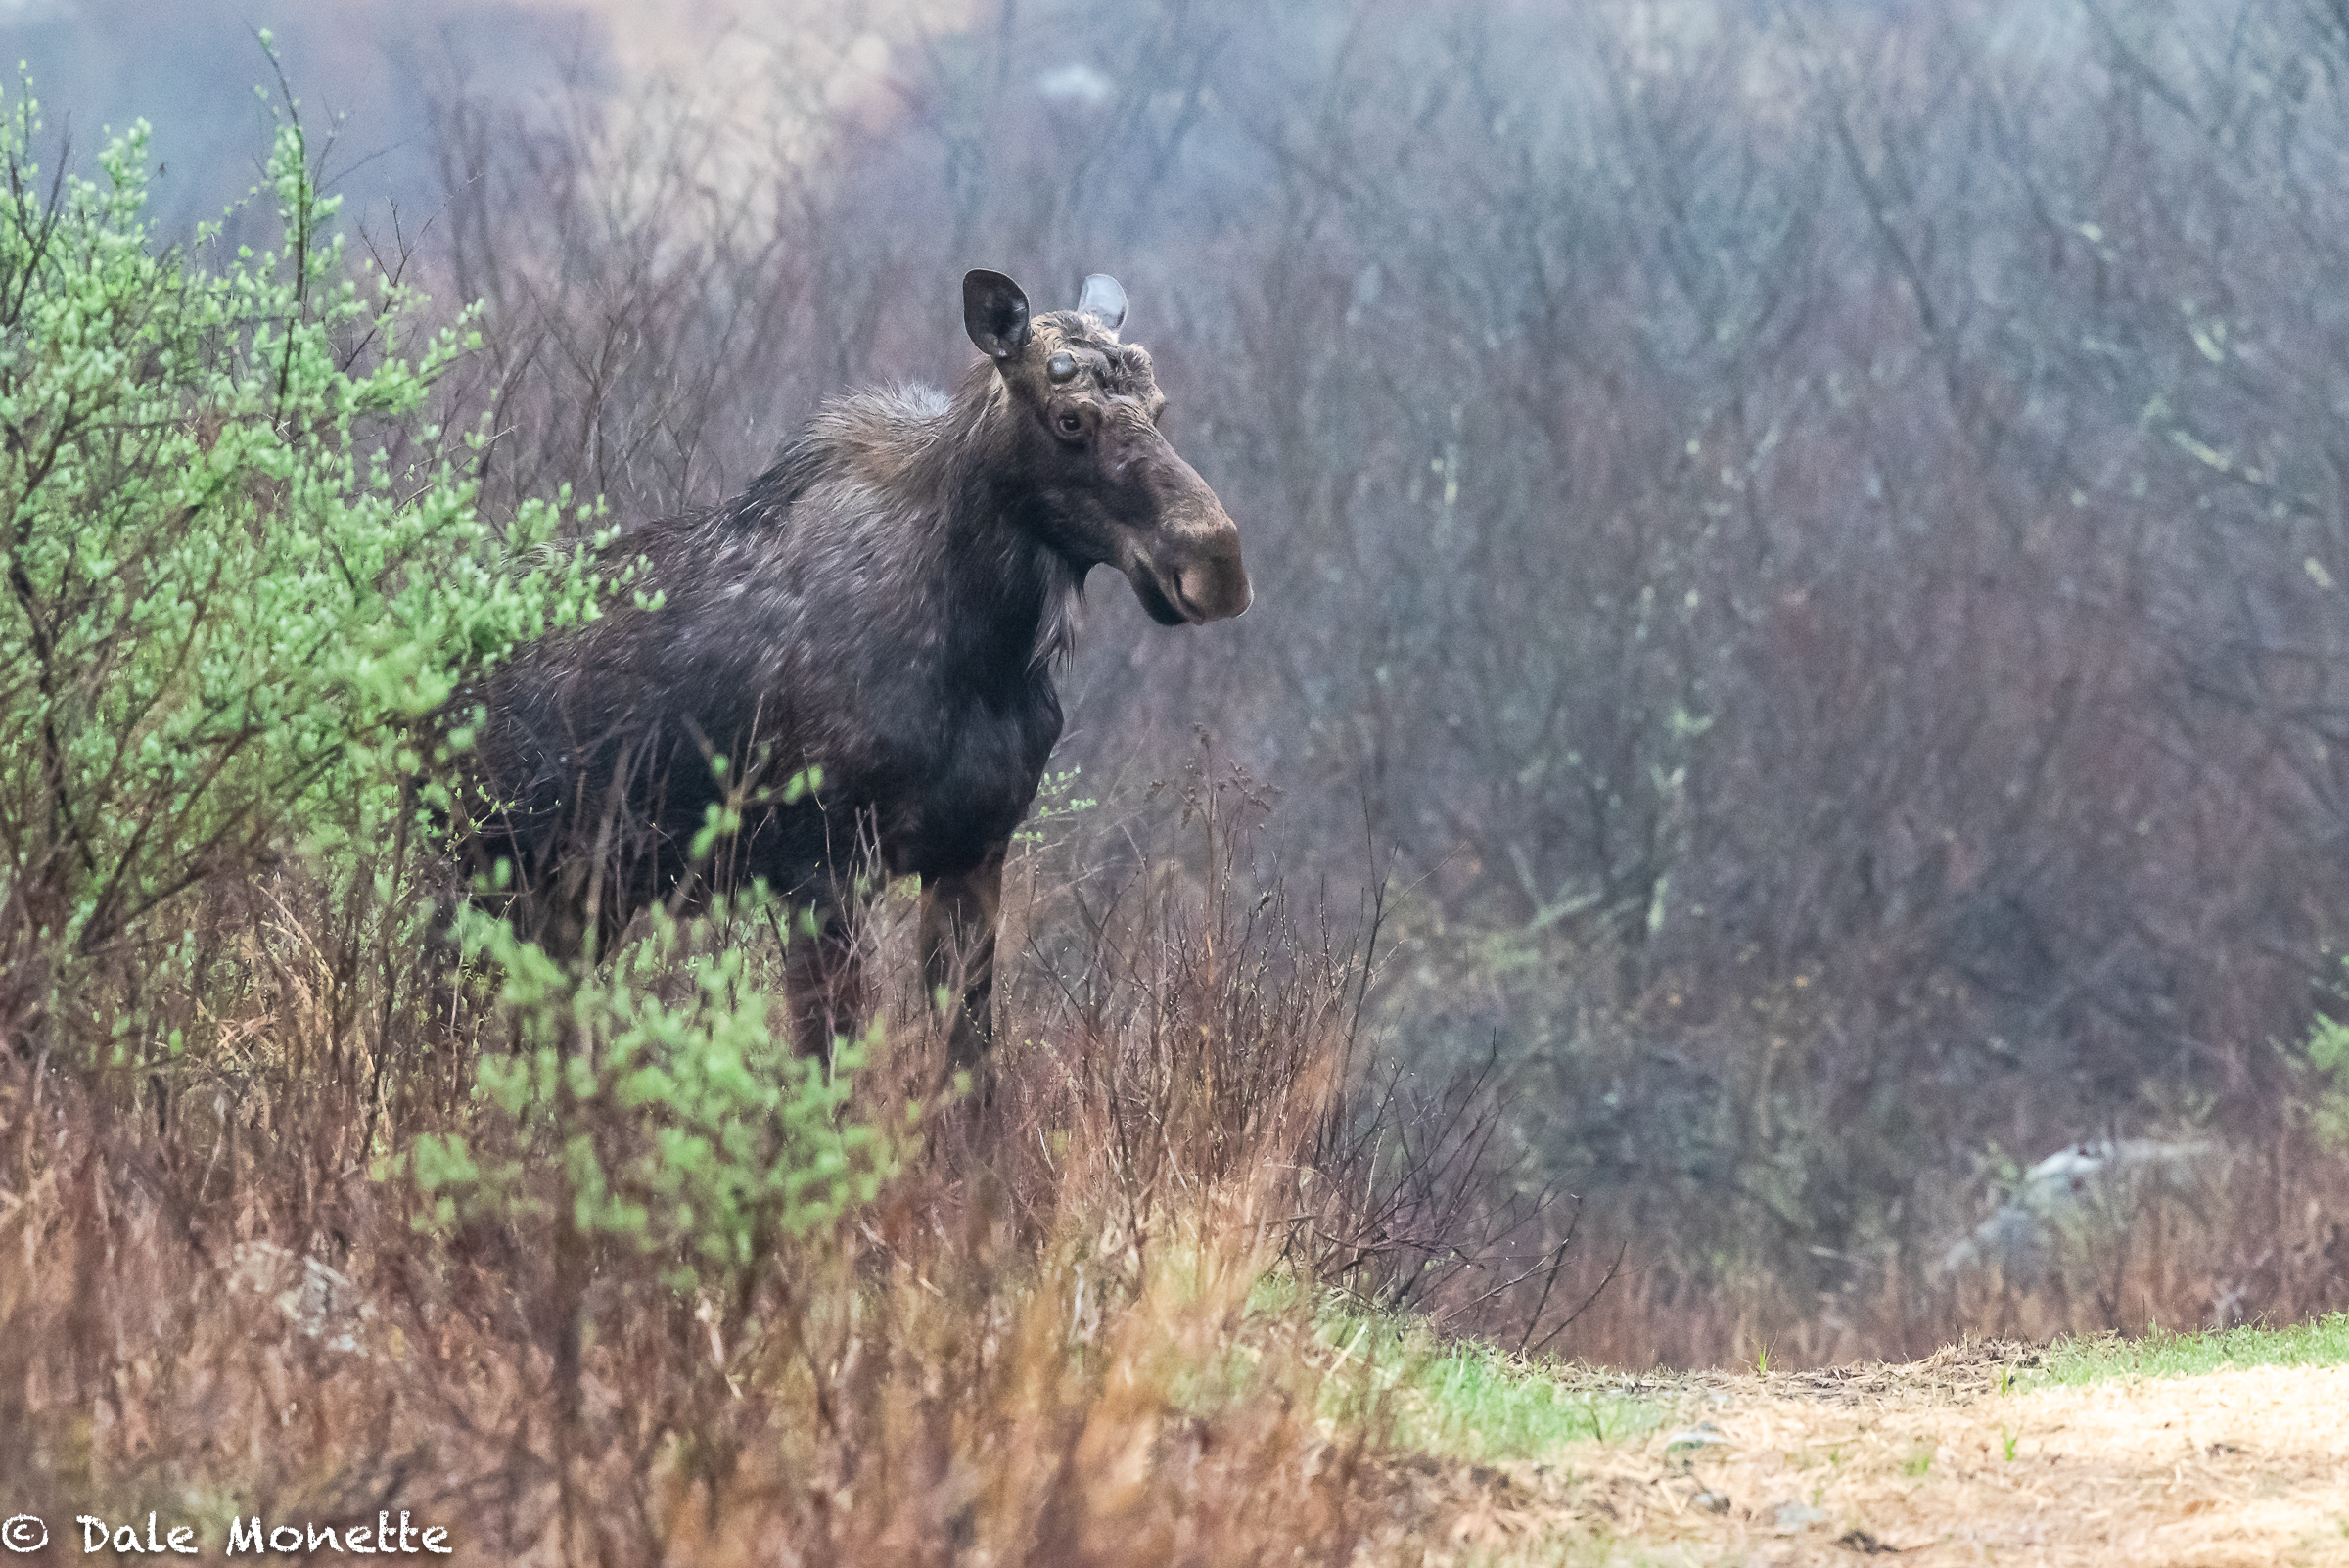   You can see from this image that this is a bull moose. He is just starting to grow his antlers for the fall mating season. Some moose can grow antlers up to 35 pounds !  